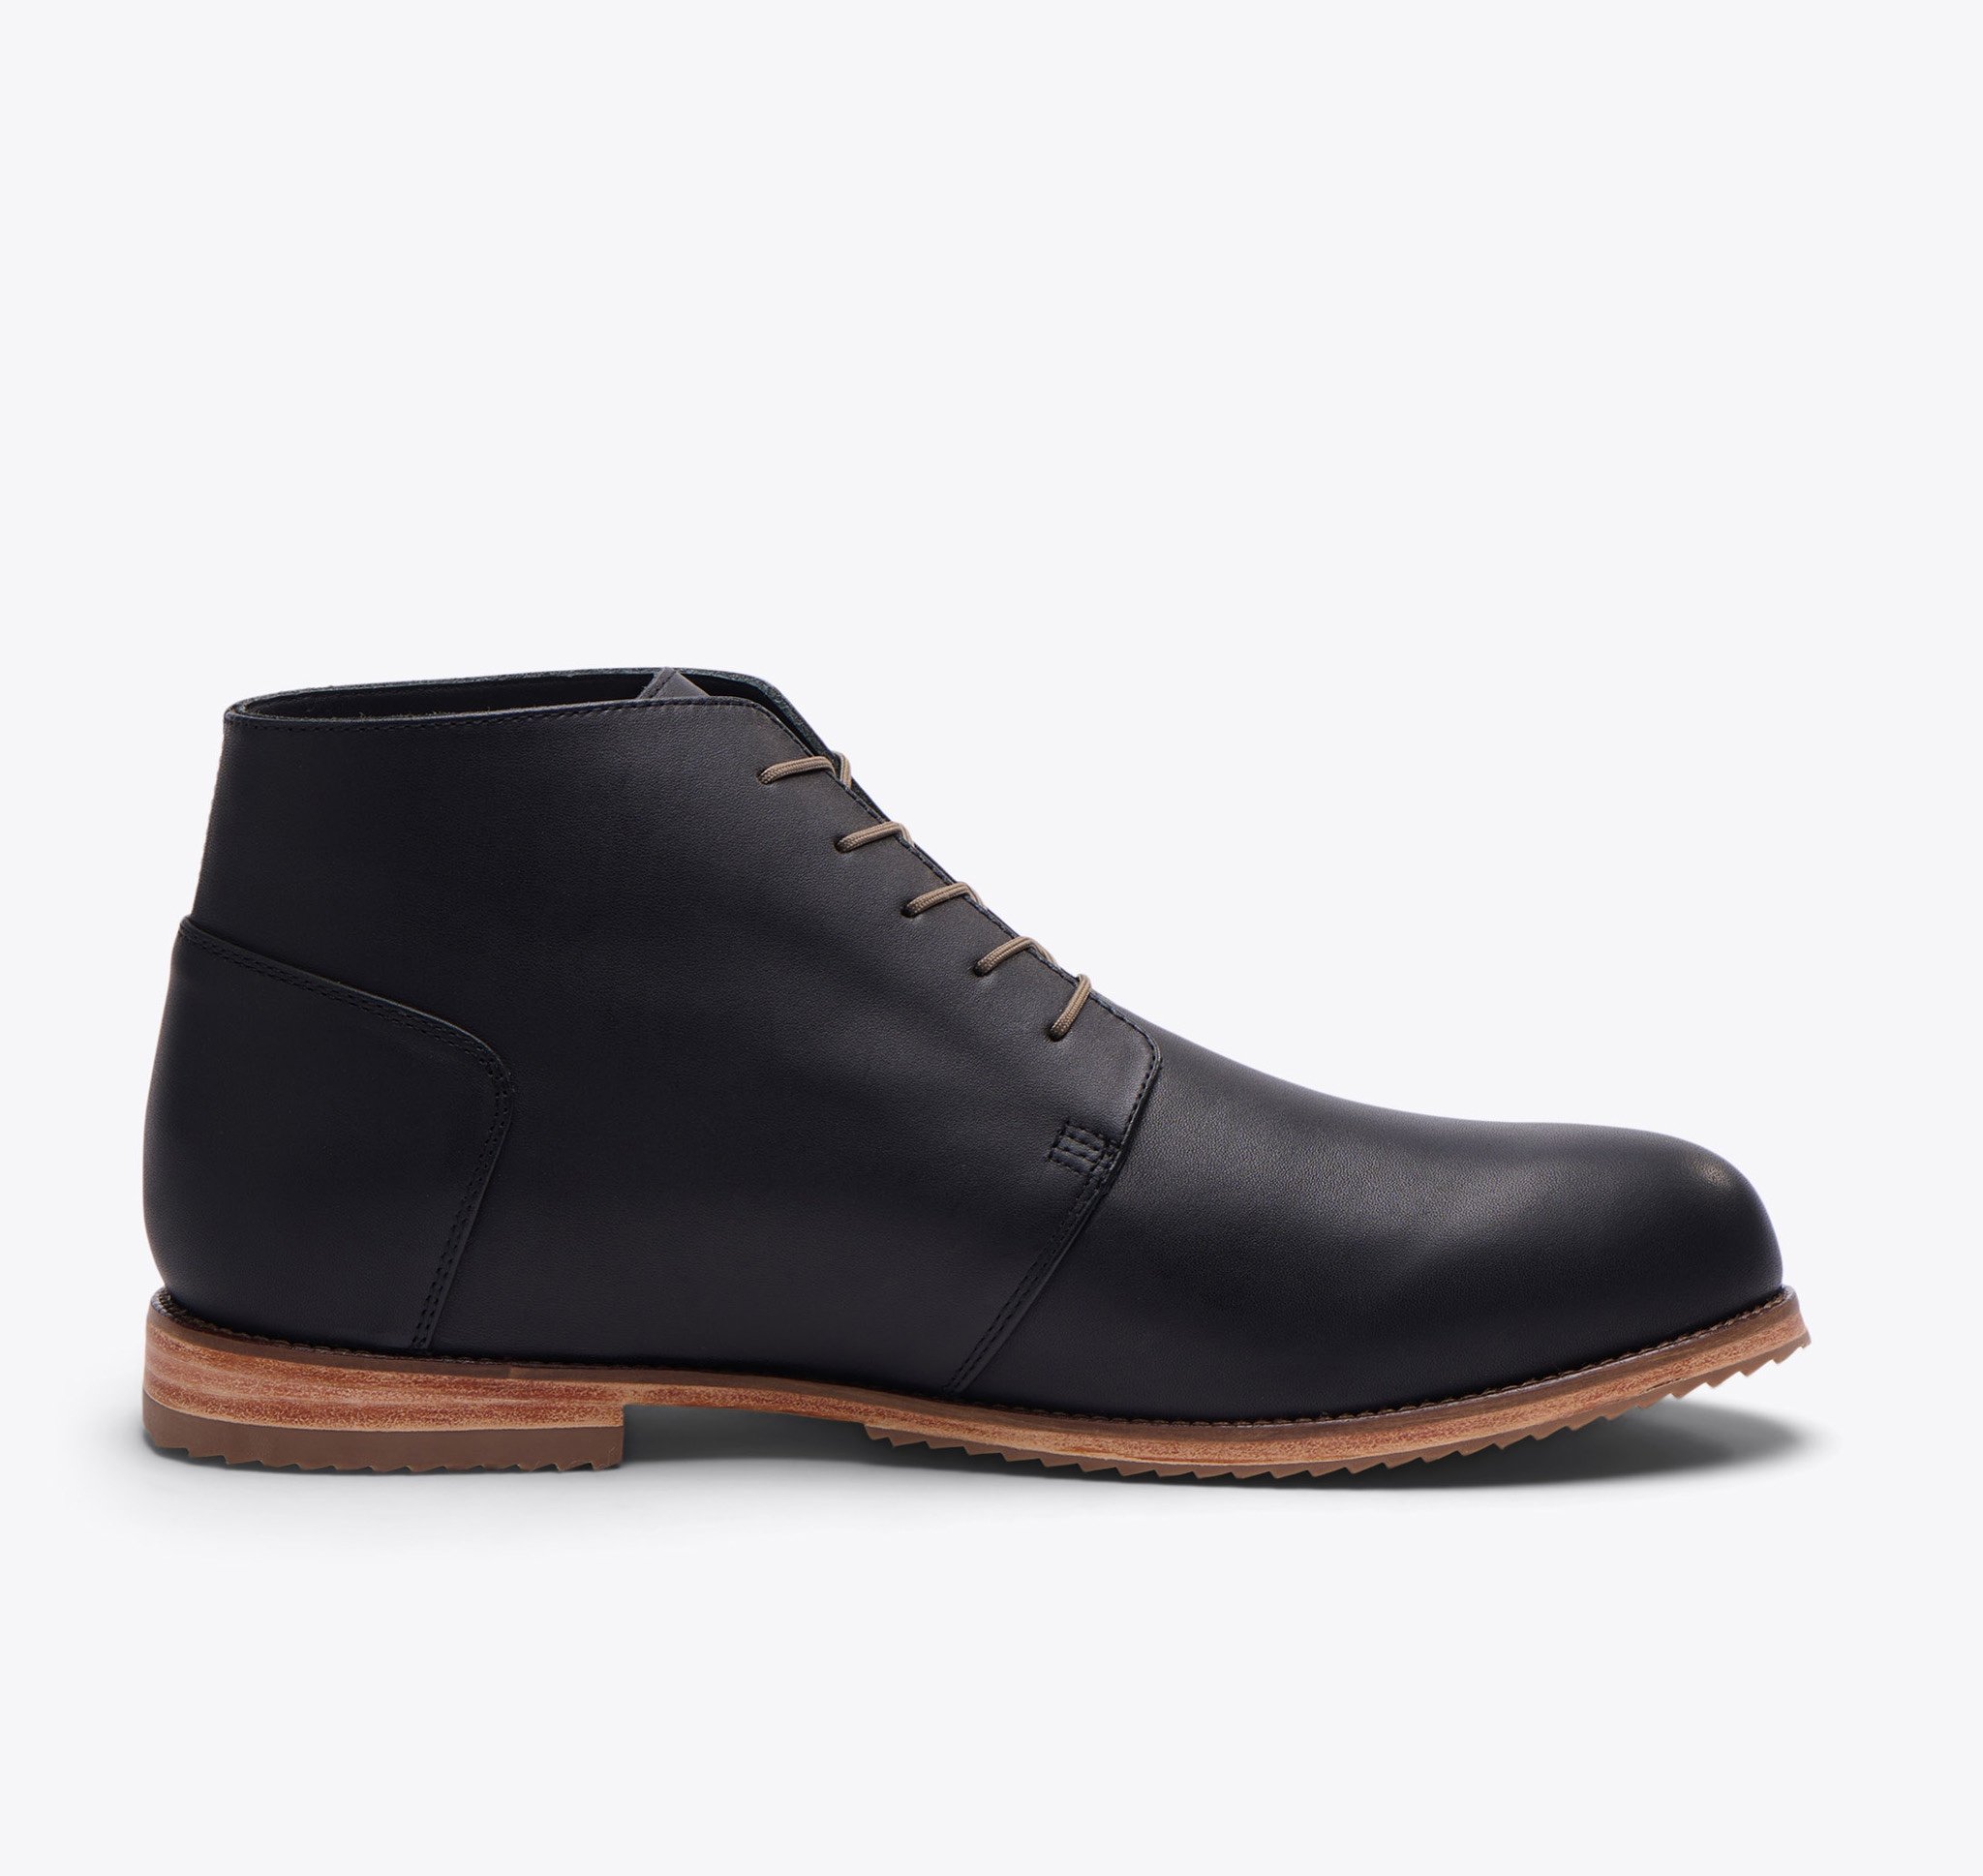 Nisolo Everyday Chukka Boot Black - Every Nisolo product is built on the foundation of comfort, function, and design. 